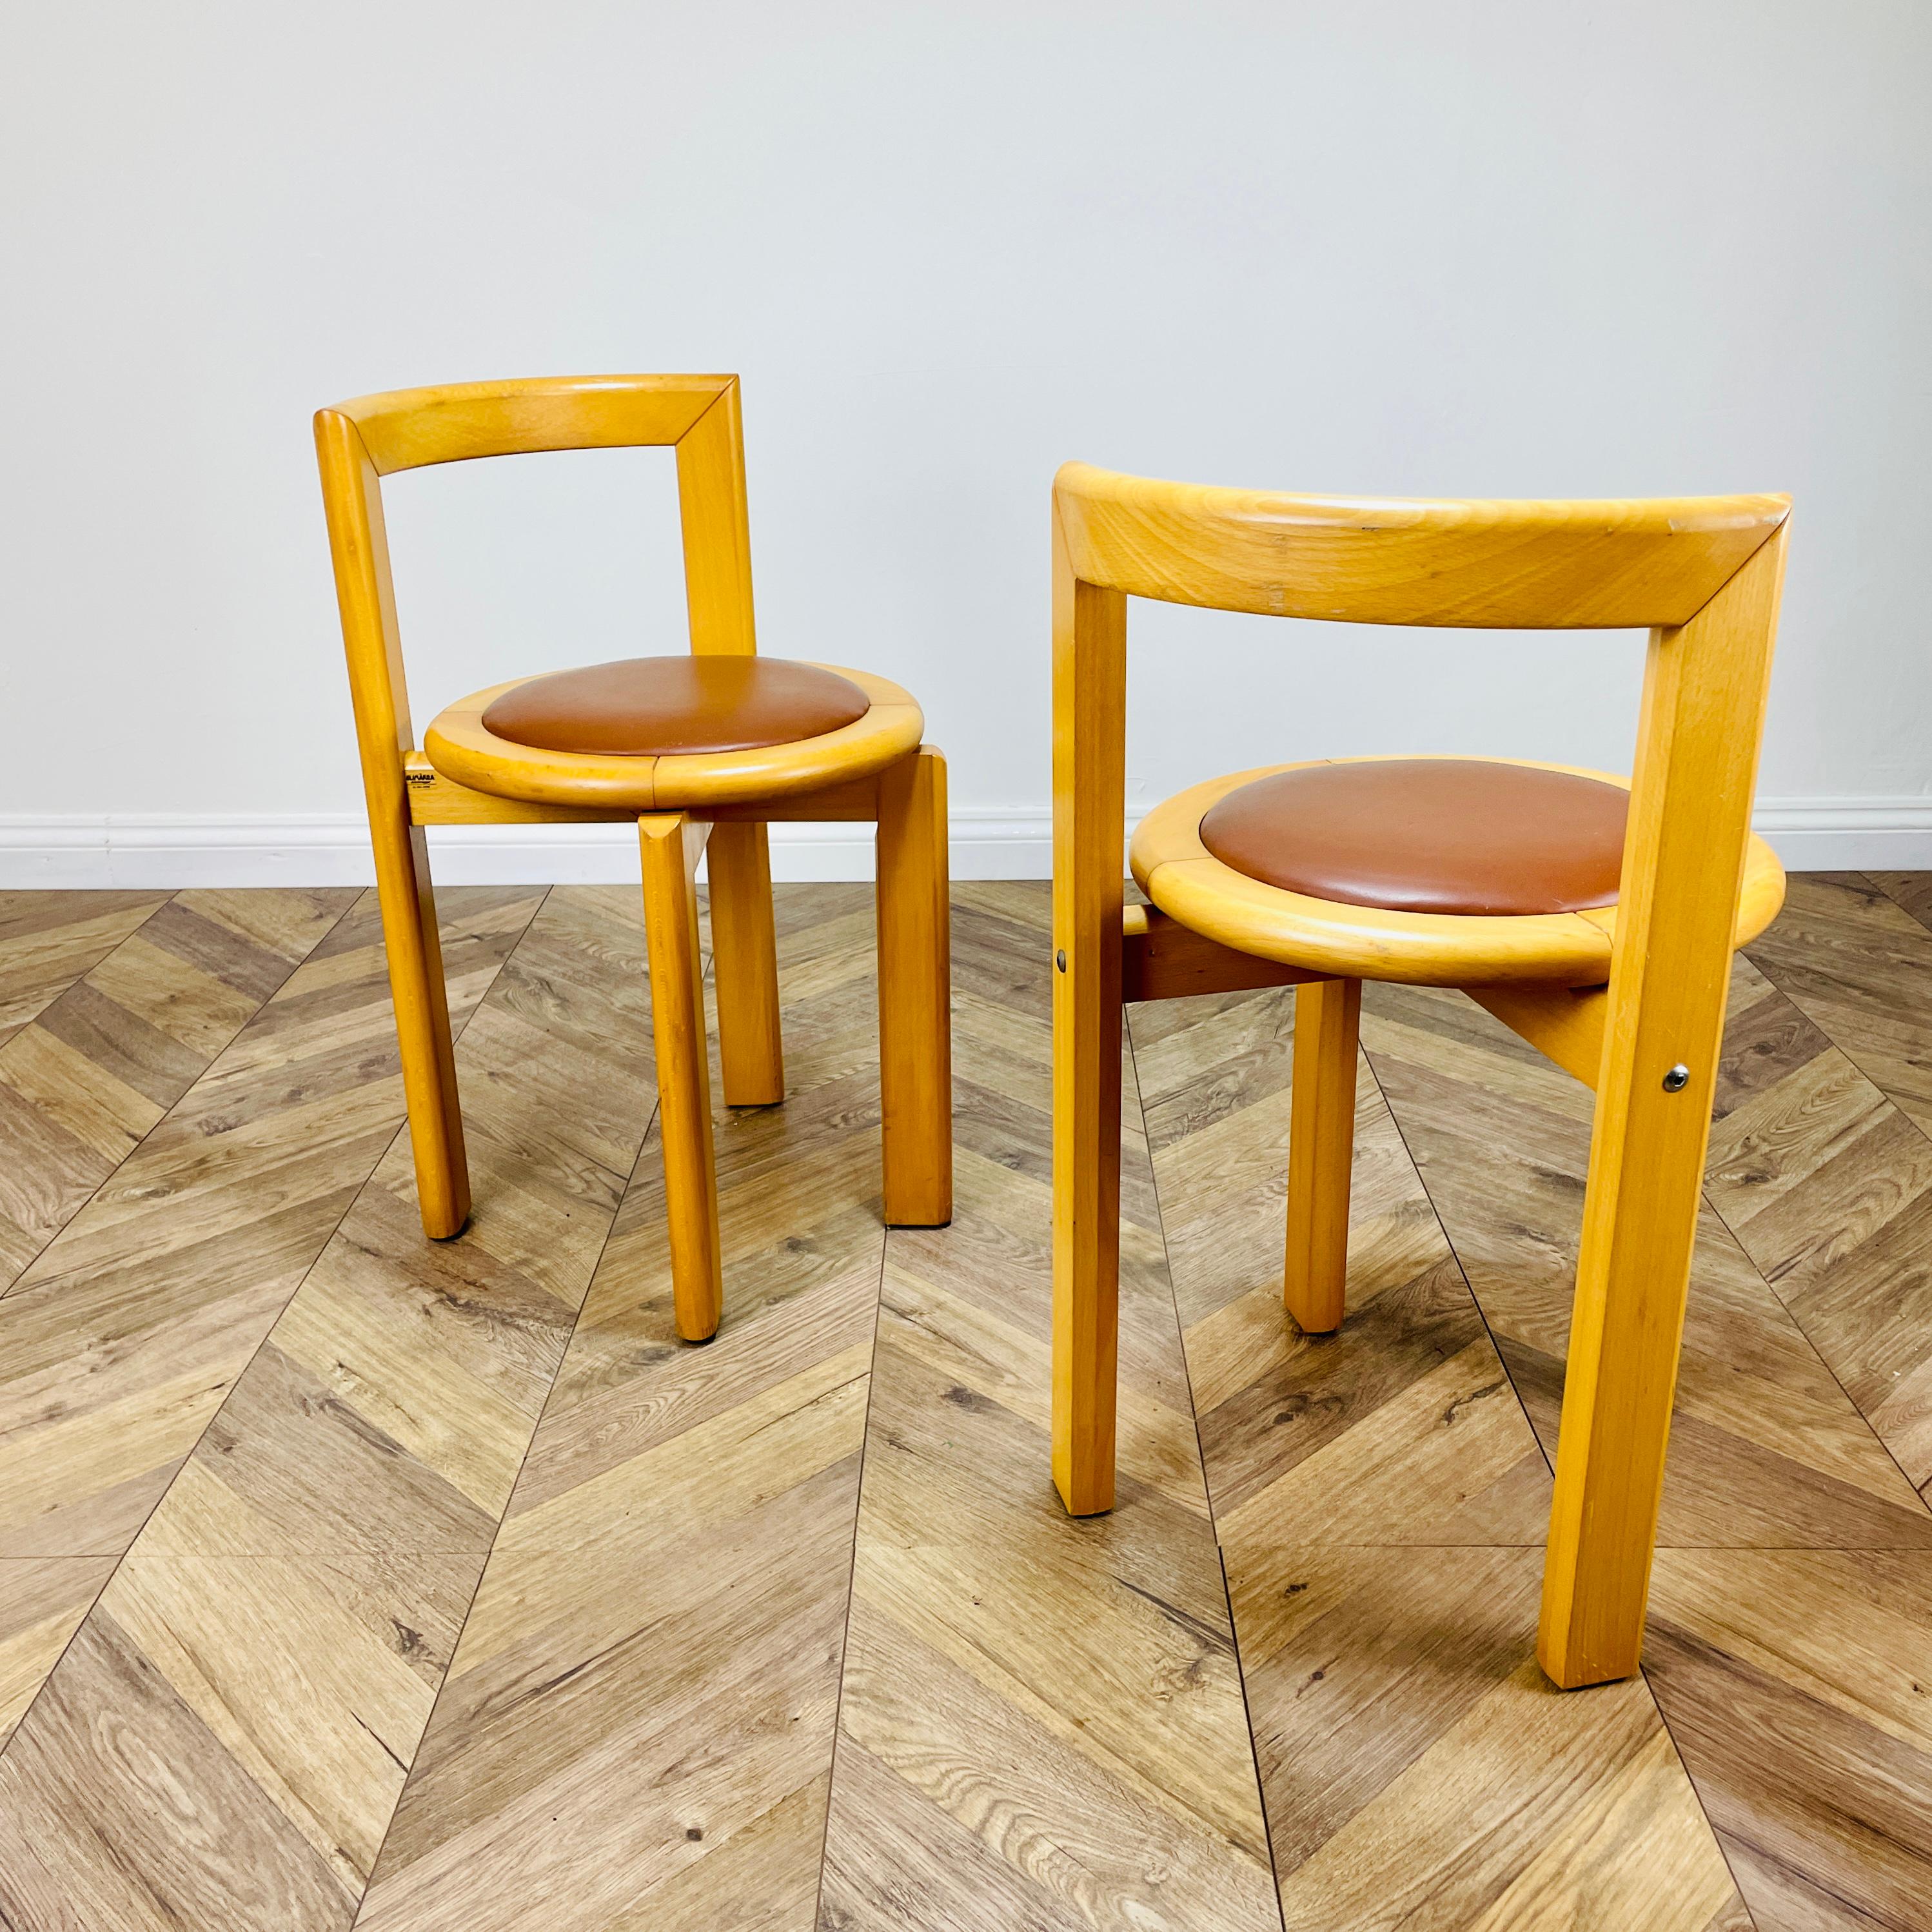 Swedish Modernist Chairs inspired by Bruno Rey, Made by Glimåkra of Sweden, Set of 2